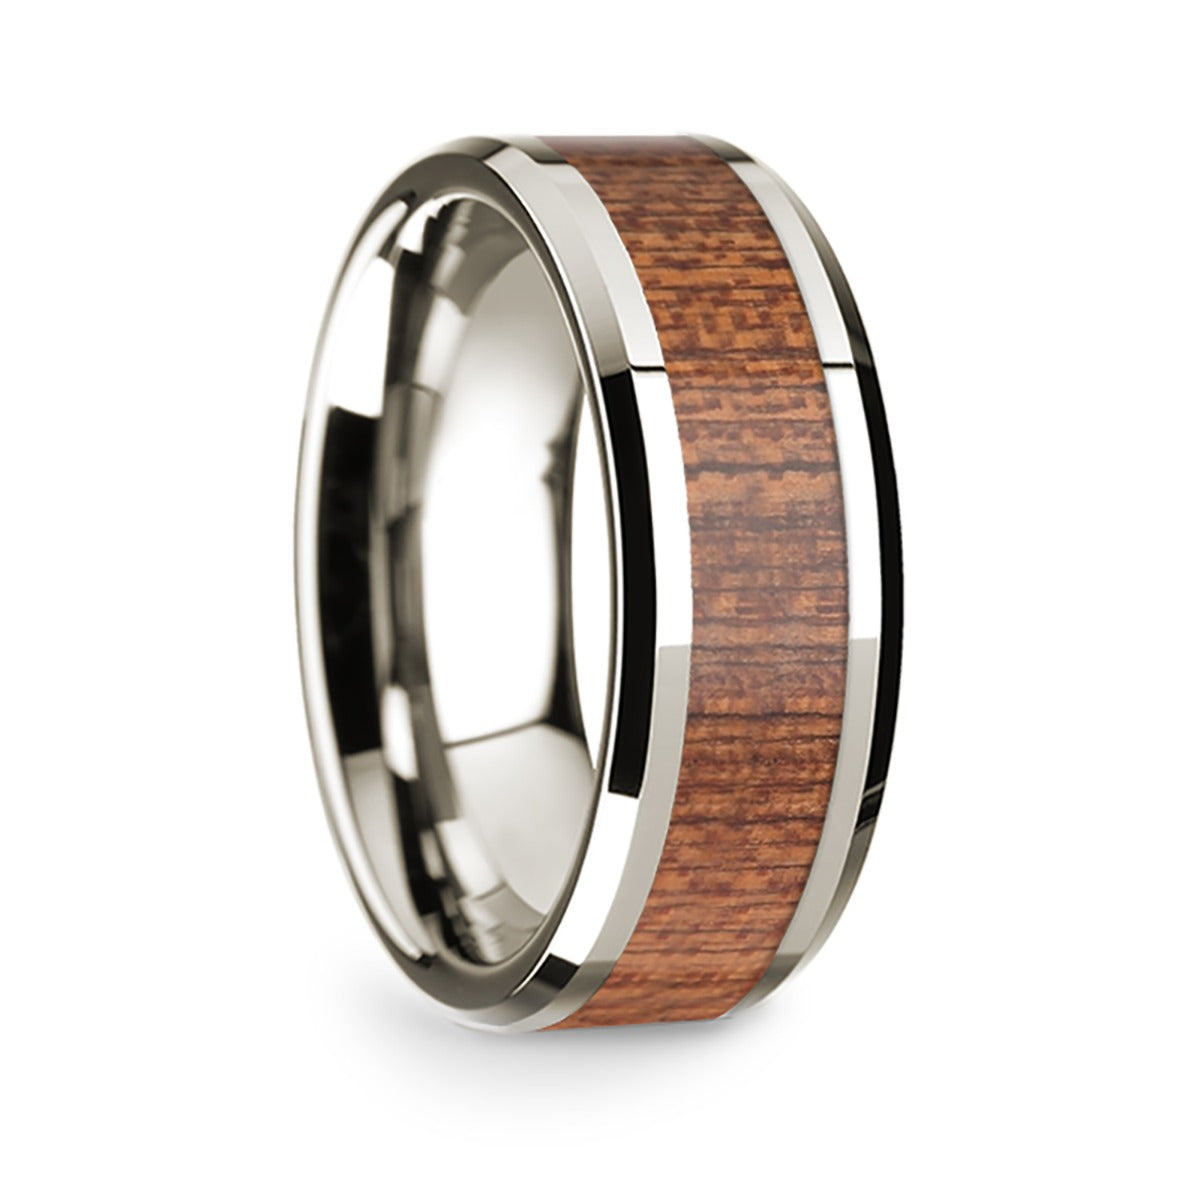 14k White Gold Men's Wedding Band with Cherry Wood Inlay